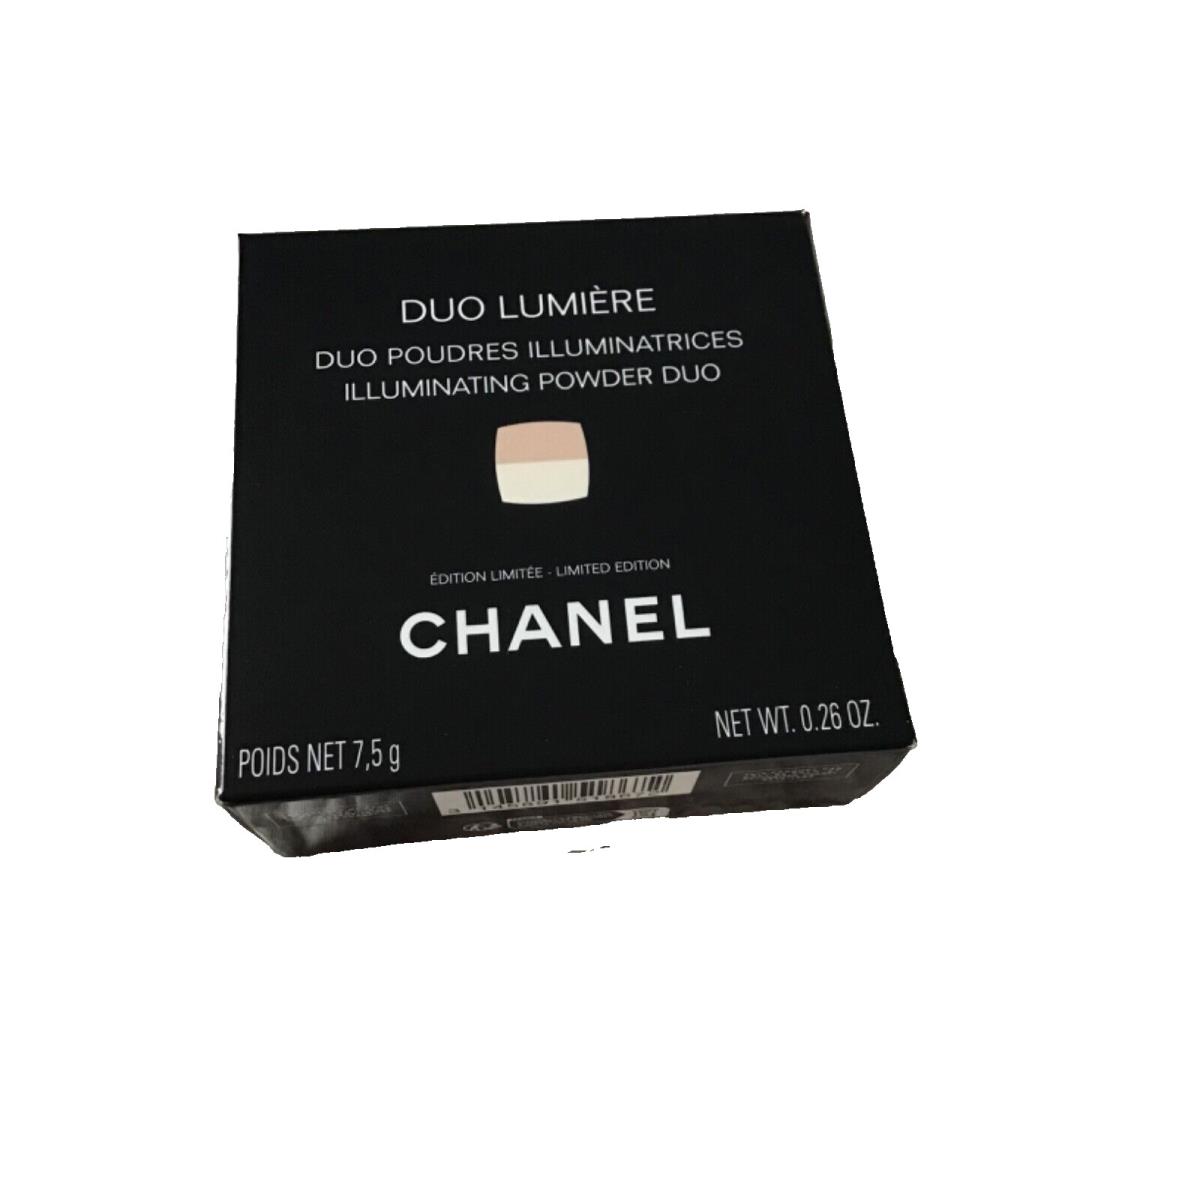 Chanel Holiday Limited Edition Duo Lumiere Highlighter Illuminating Duo